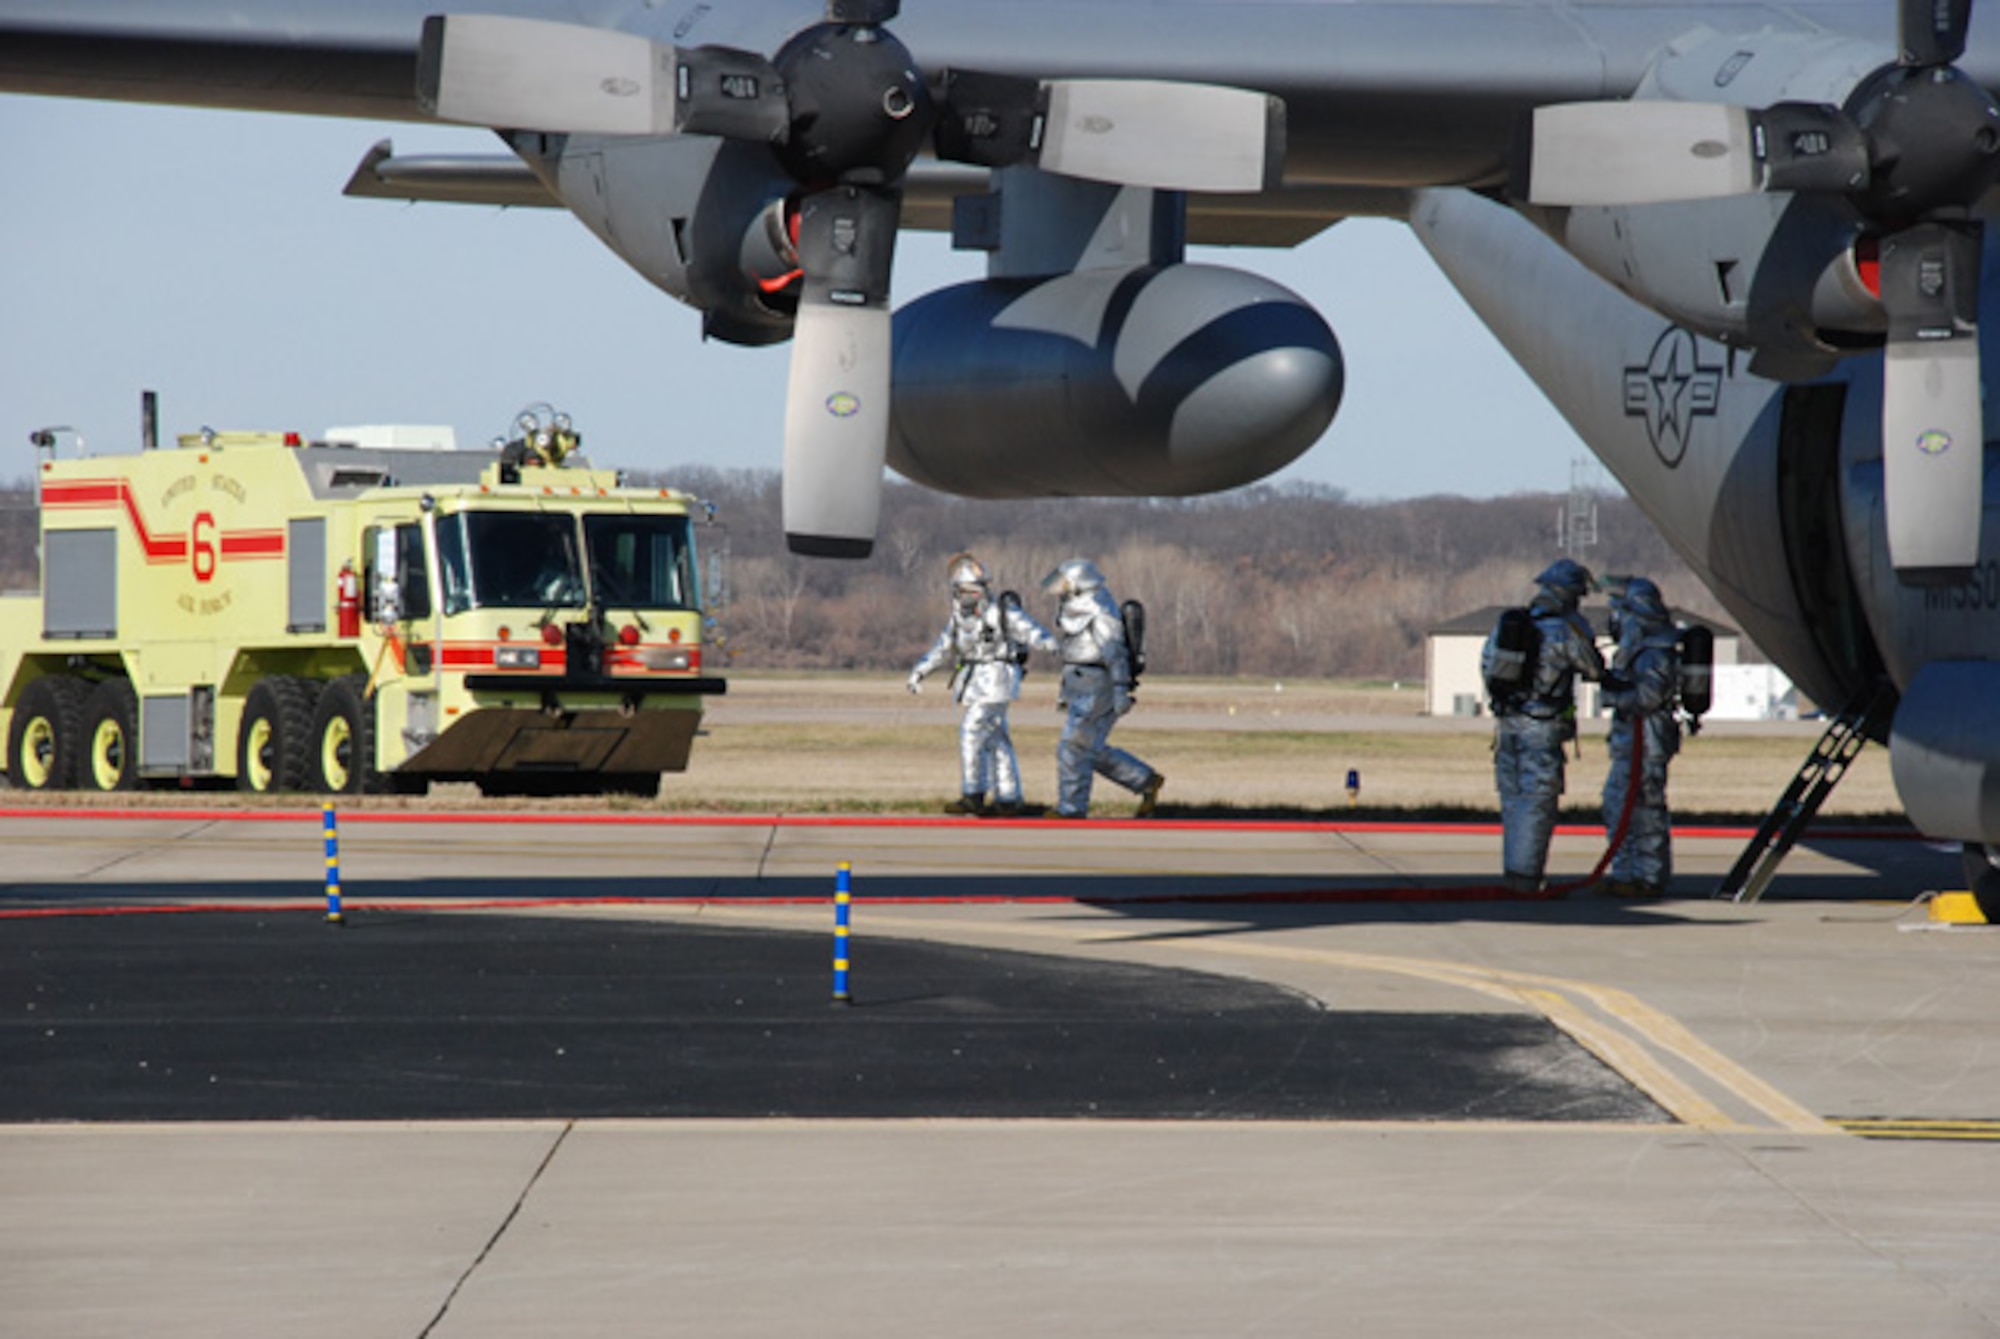 The 139th Airlift Wing in St. Joseph Missouri, participates in a joint exercise with civilian authorities on March 25, 2009. (U.S. Air Force photo by Maj. Barb Denny) (RELEASED)